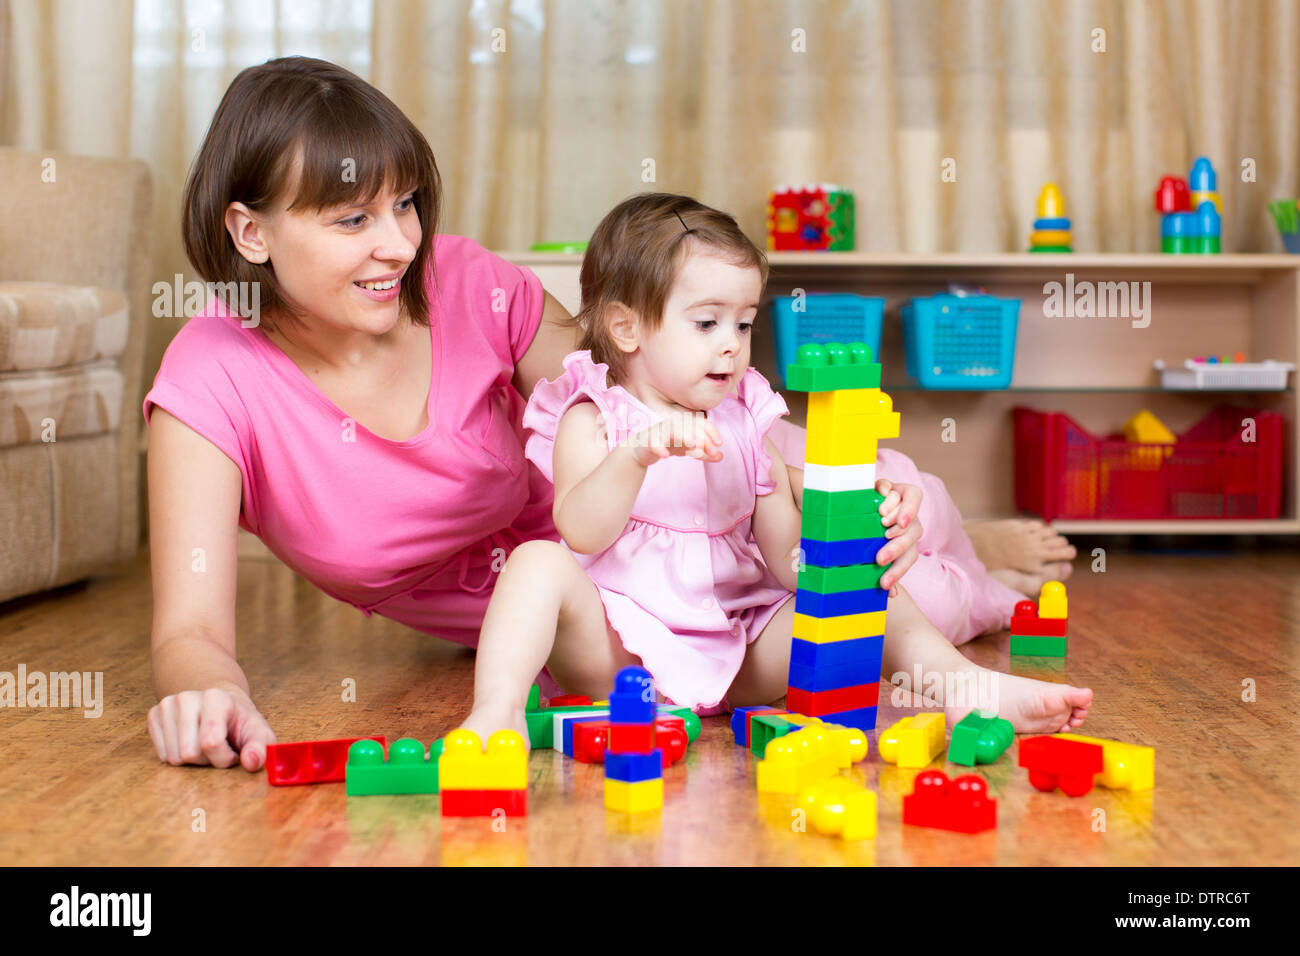 mother and her daughter play with toys at home interior Stock Photo